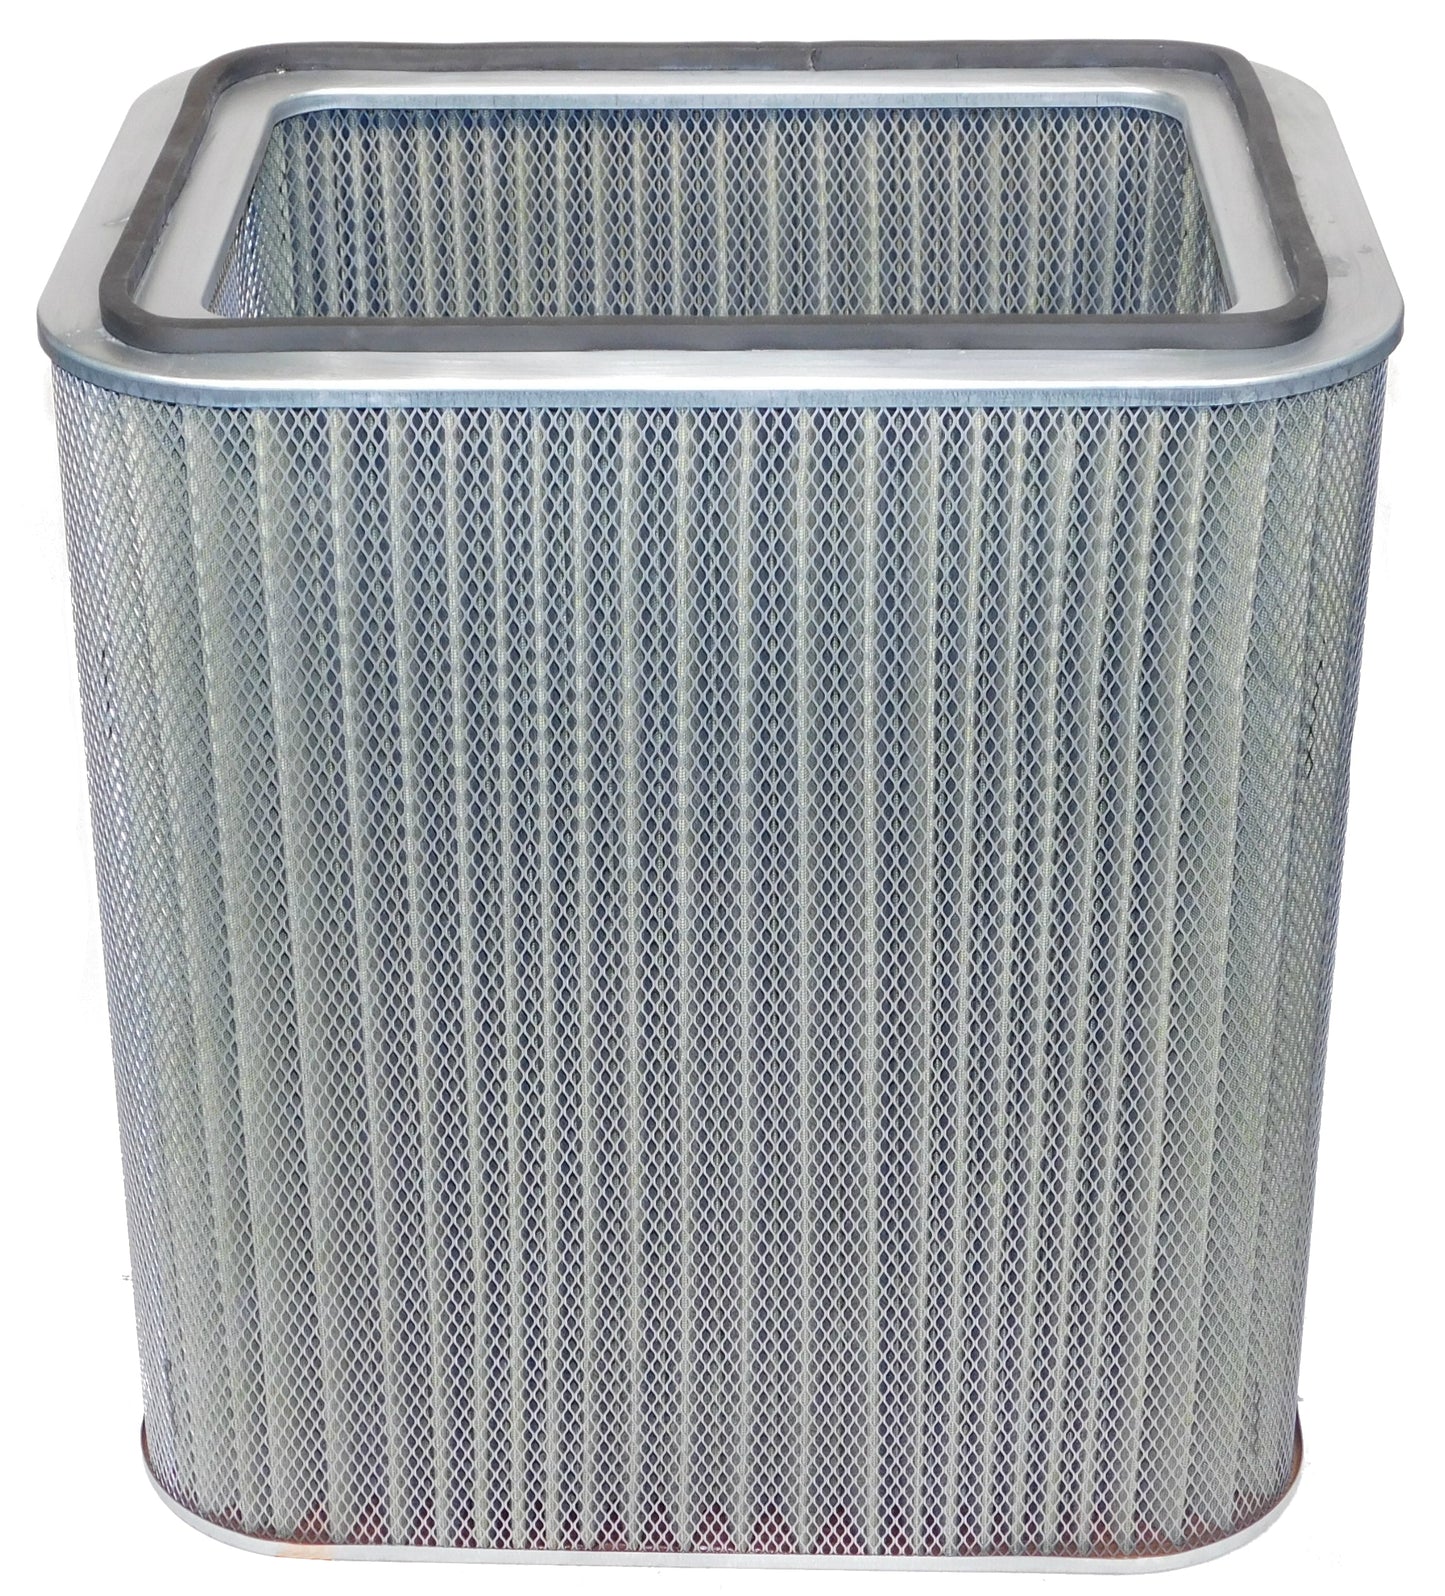 P031596-016-340 - Replacement for Torit filter